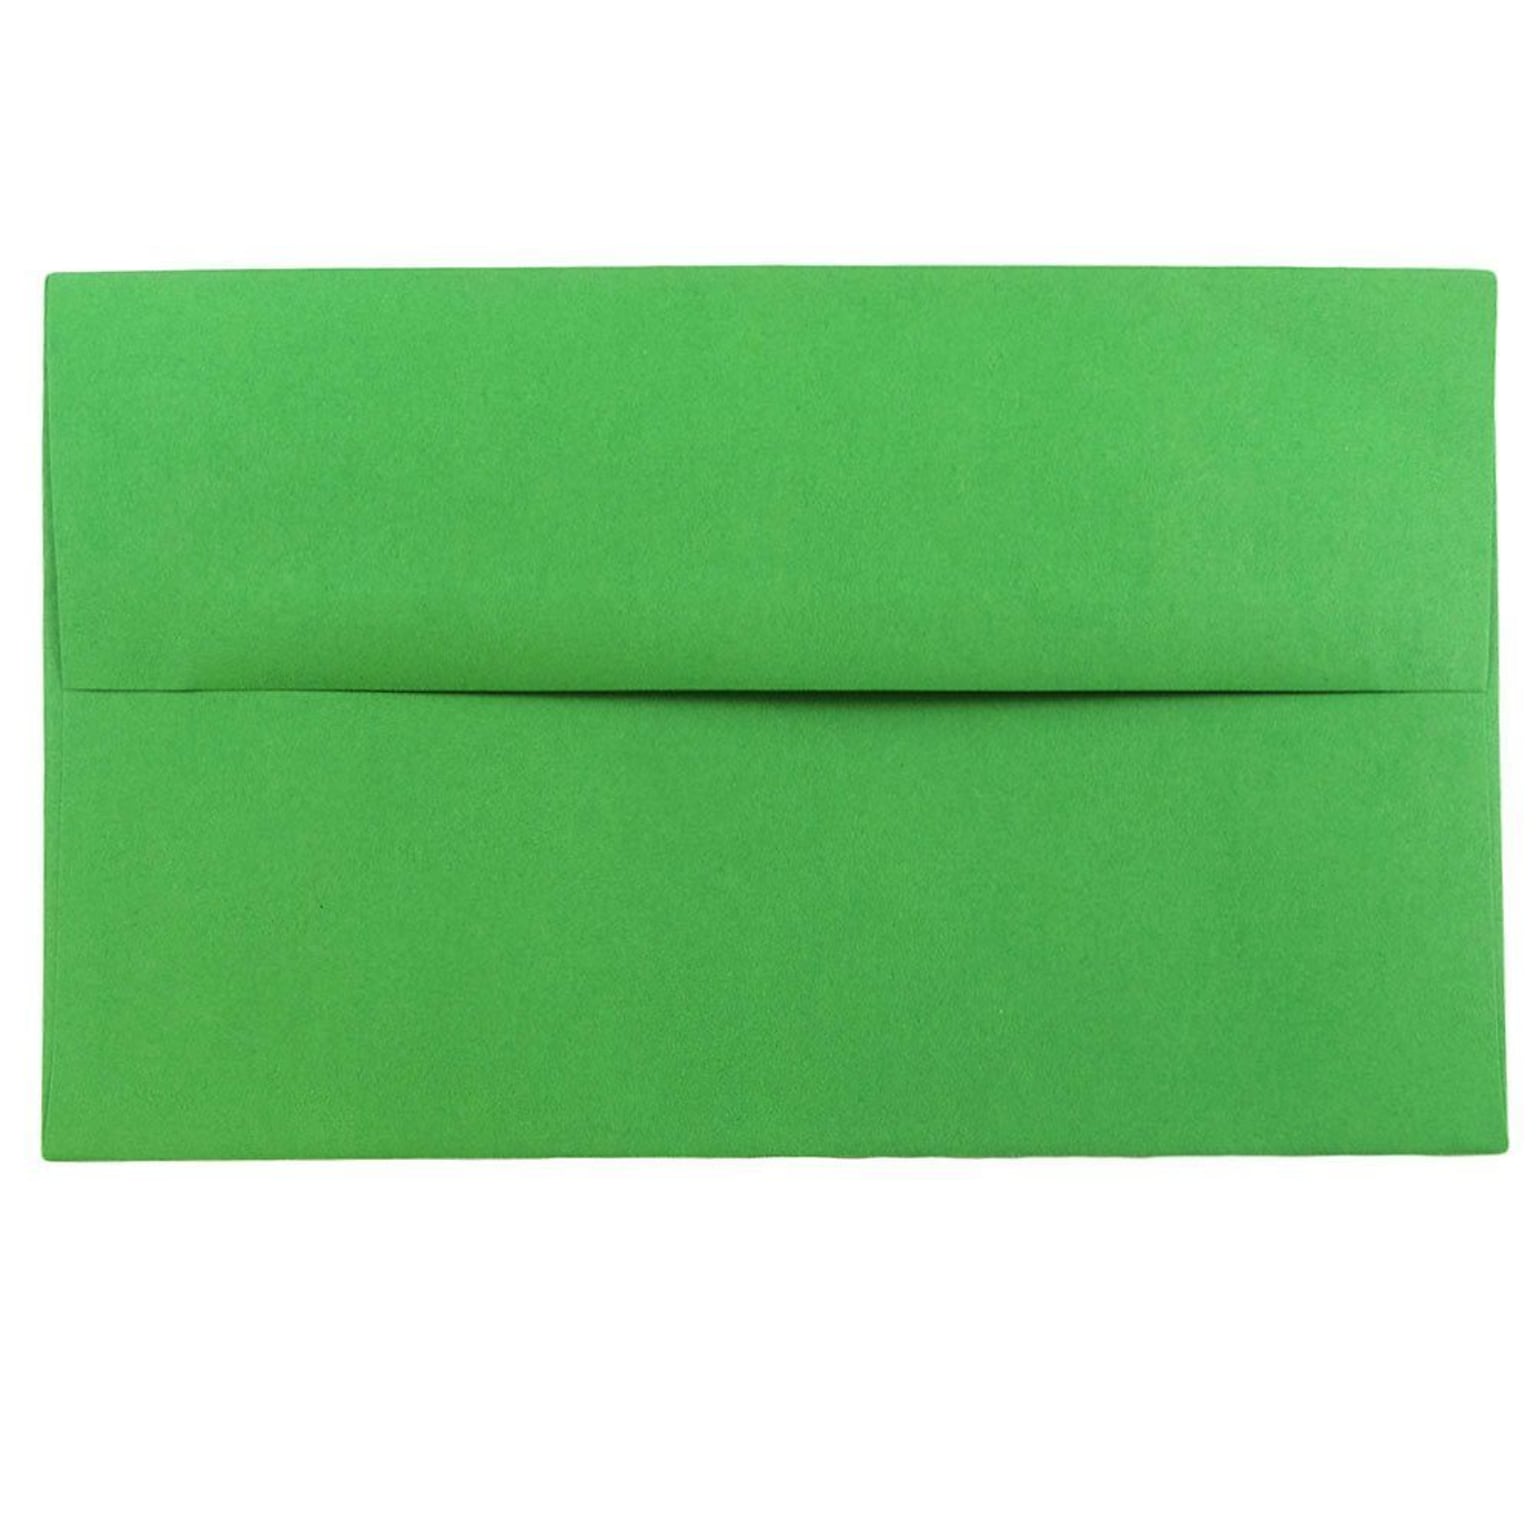 JAM Paper A10 Colored Invitation Envelopes, 6 x 9.5, Green Recycled, 50/Pack (35633I)